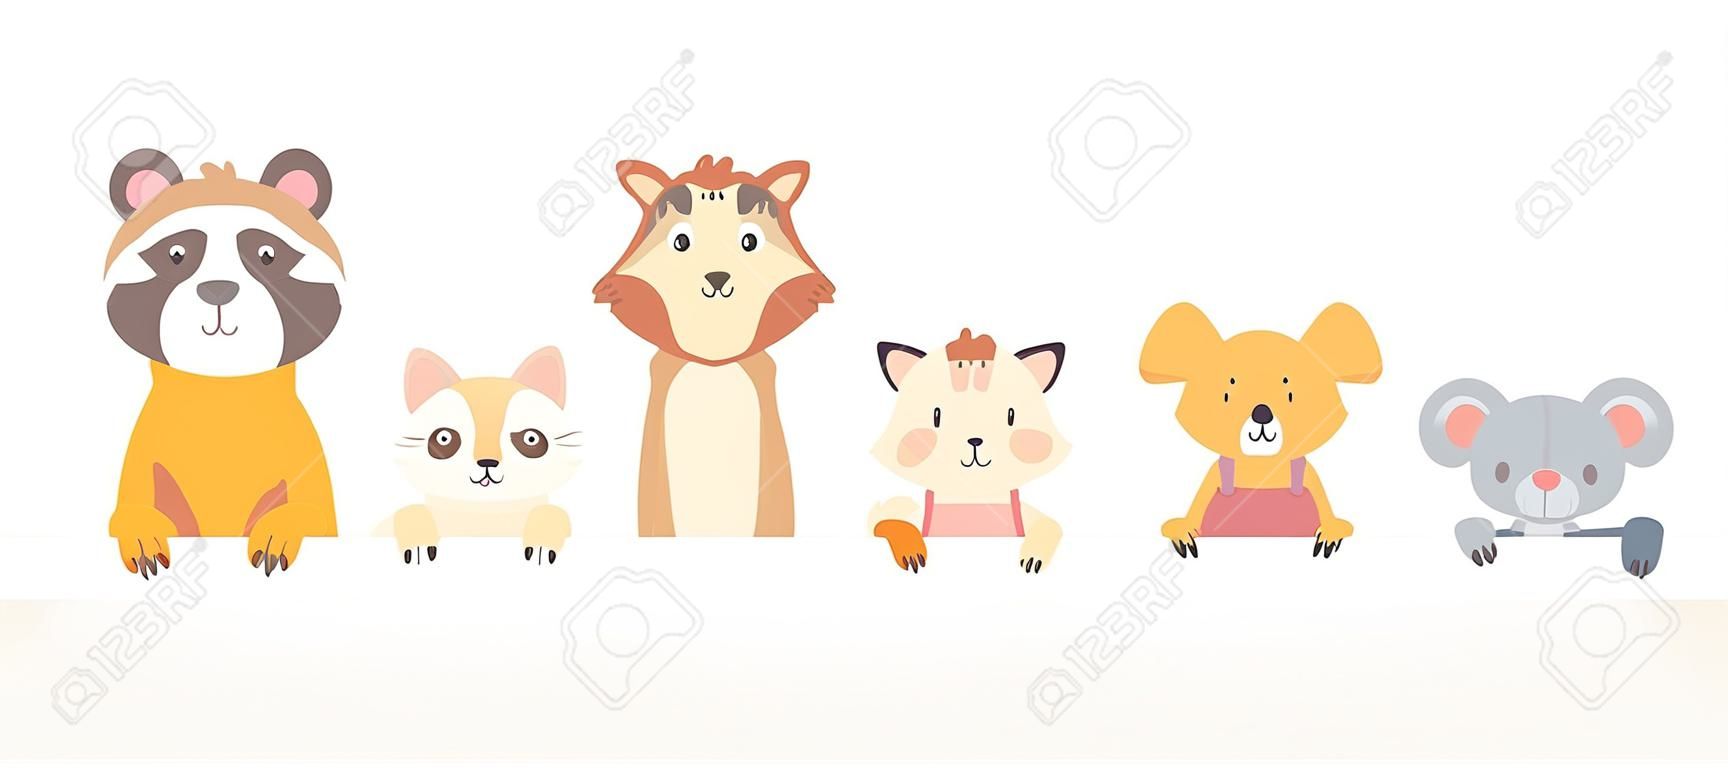 Cute animals look out. Funny animal peeps out, hand drawn pet, adorable cat and dog. Smiling bear, raccoon and fox vector illustration set. Muzzle lion and cat look out, pets adorable smiling